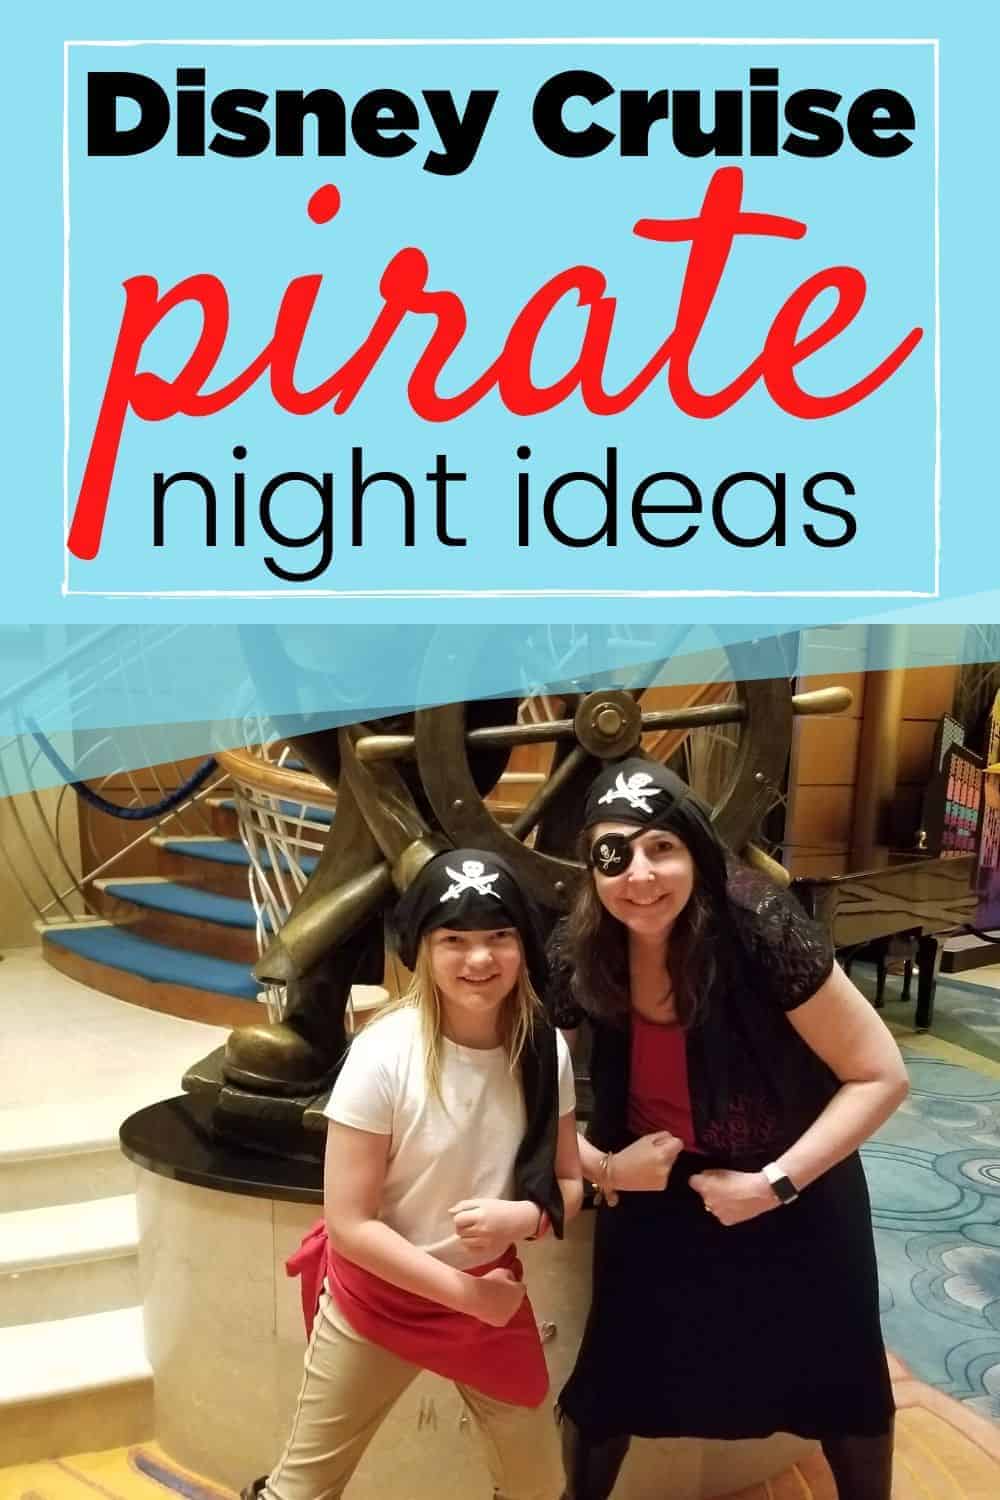 Disney Cruise Pirate Night is a fun time that everyone can join in on, but you need a pirate costume! We’ll answer all of your pirate night questions here to make sure you’re all set before you leave for your cruise!